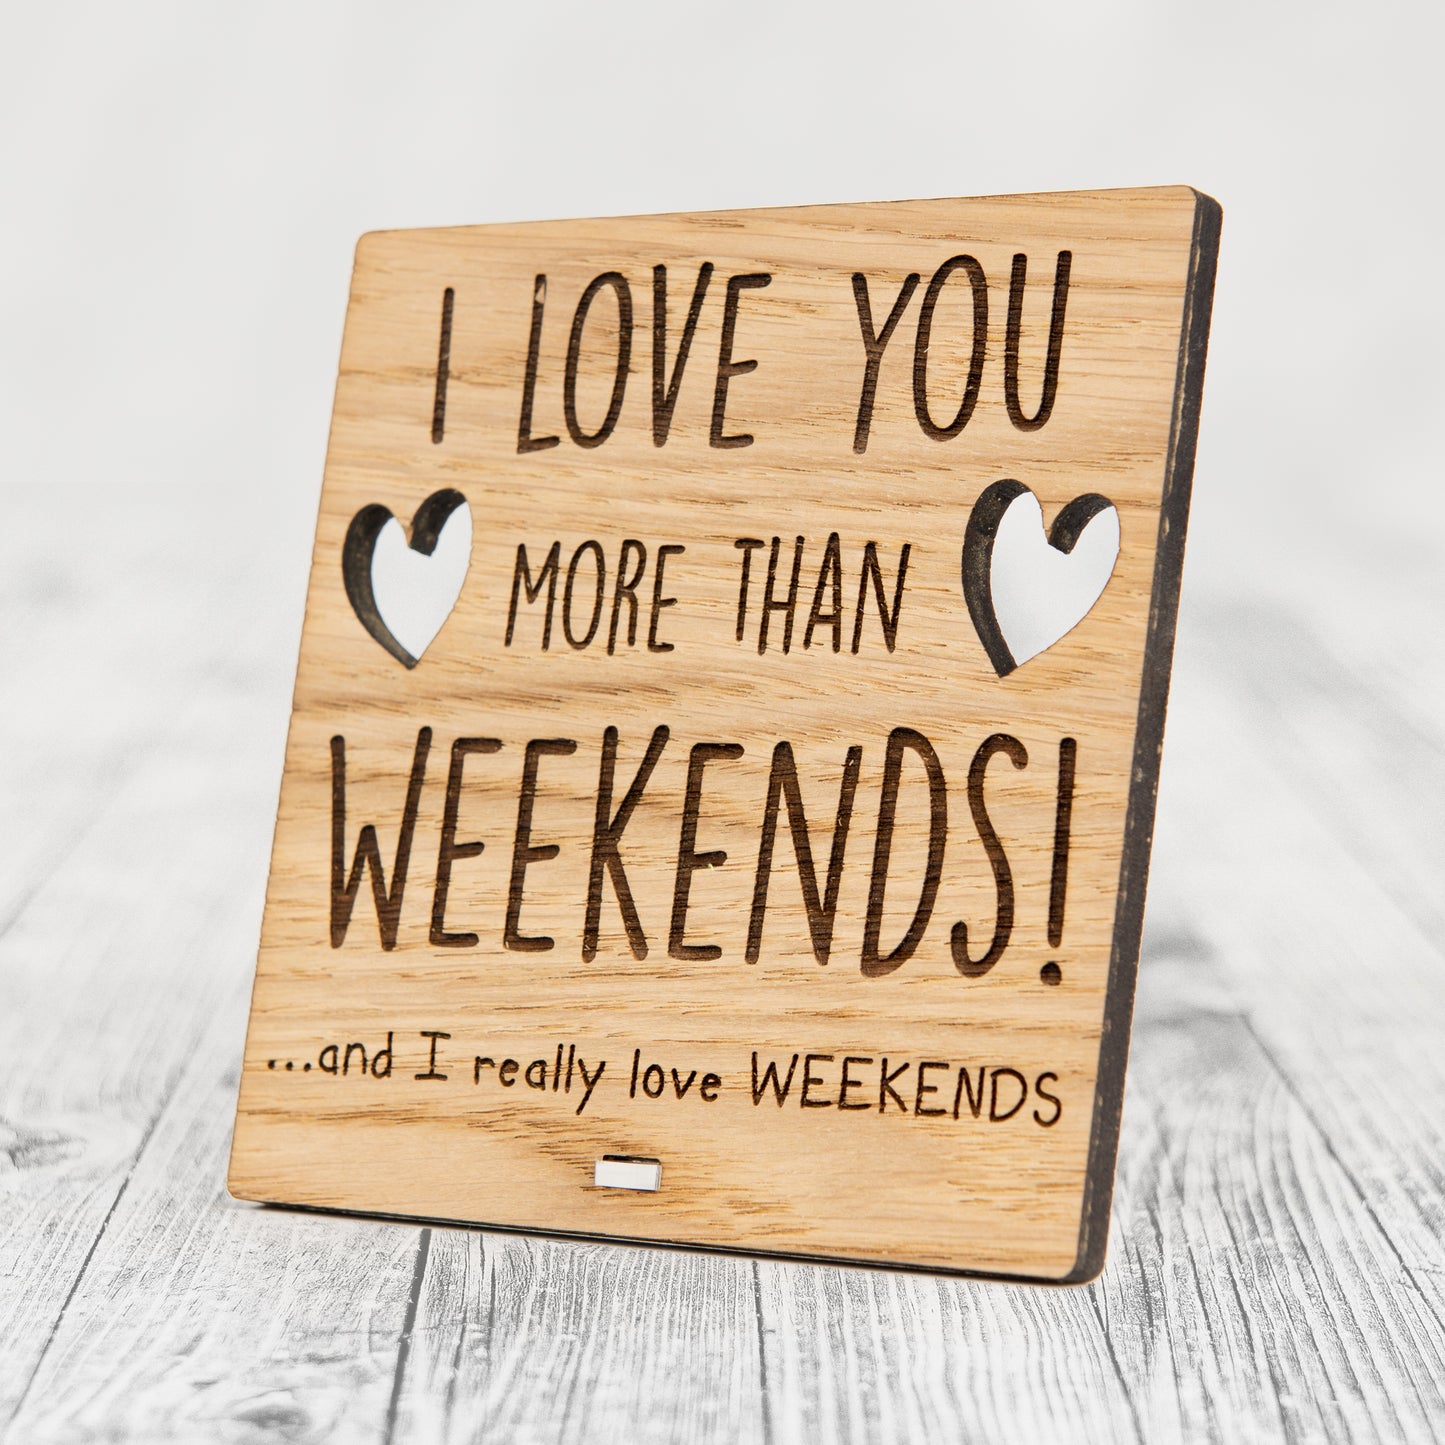 I Love You More Than WEEKENDS - Wooden Valentine's Day Plaque